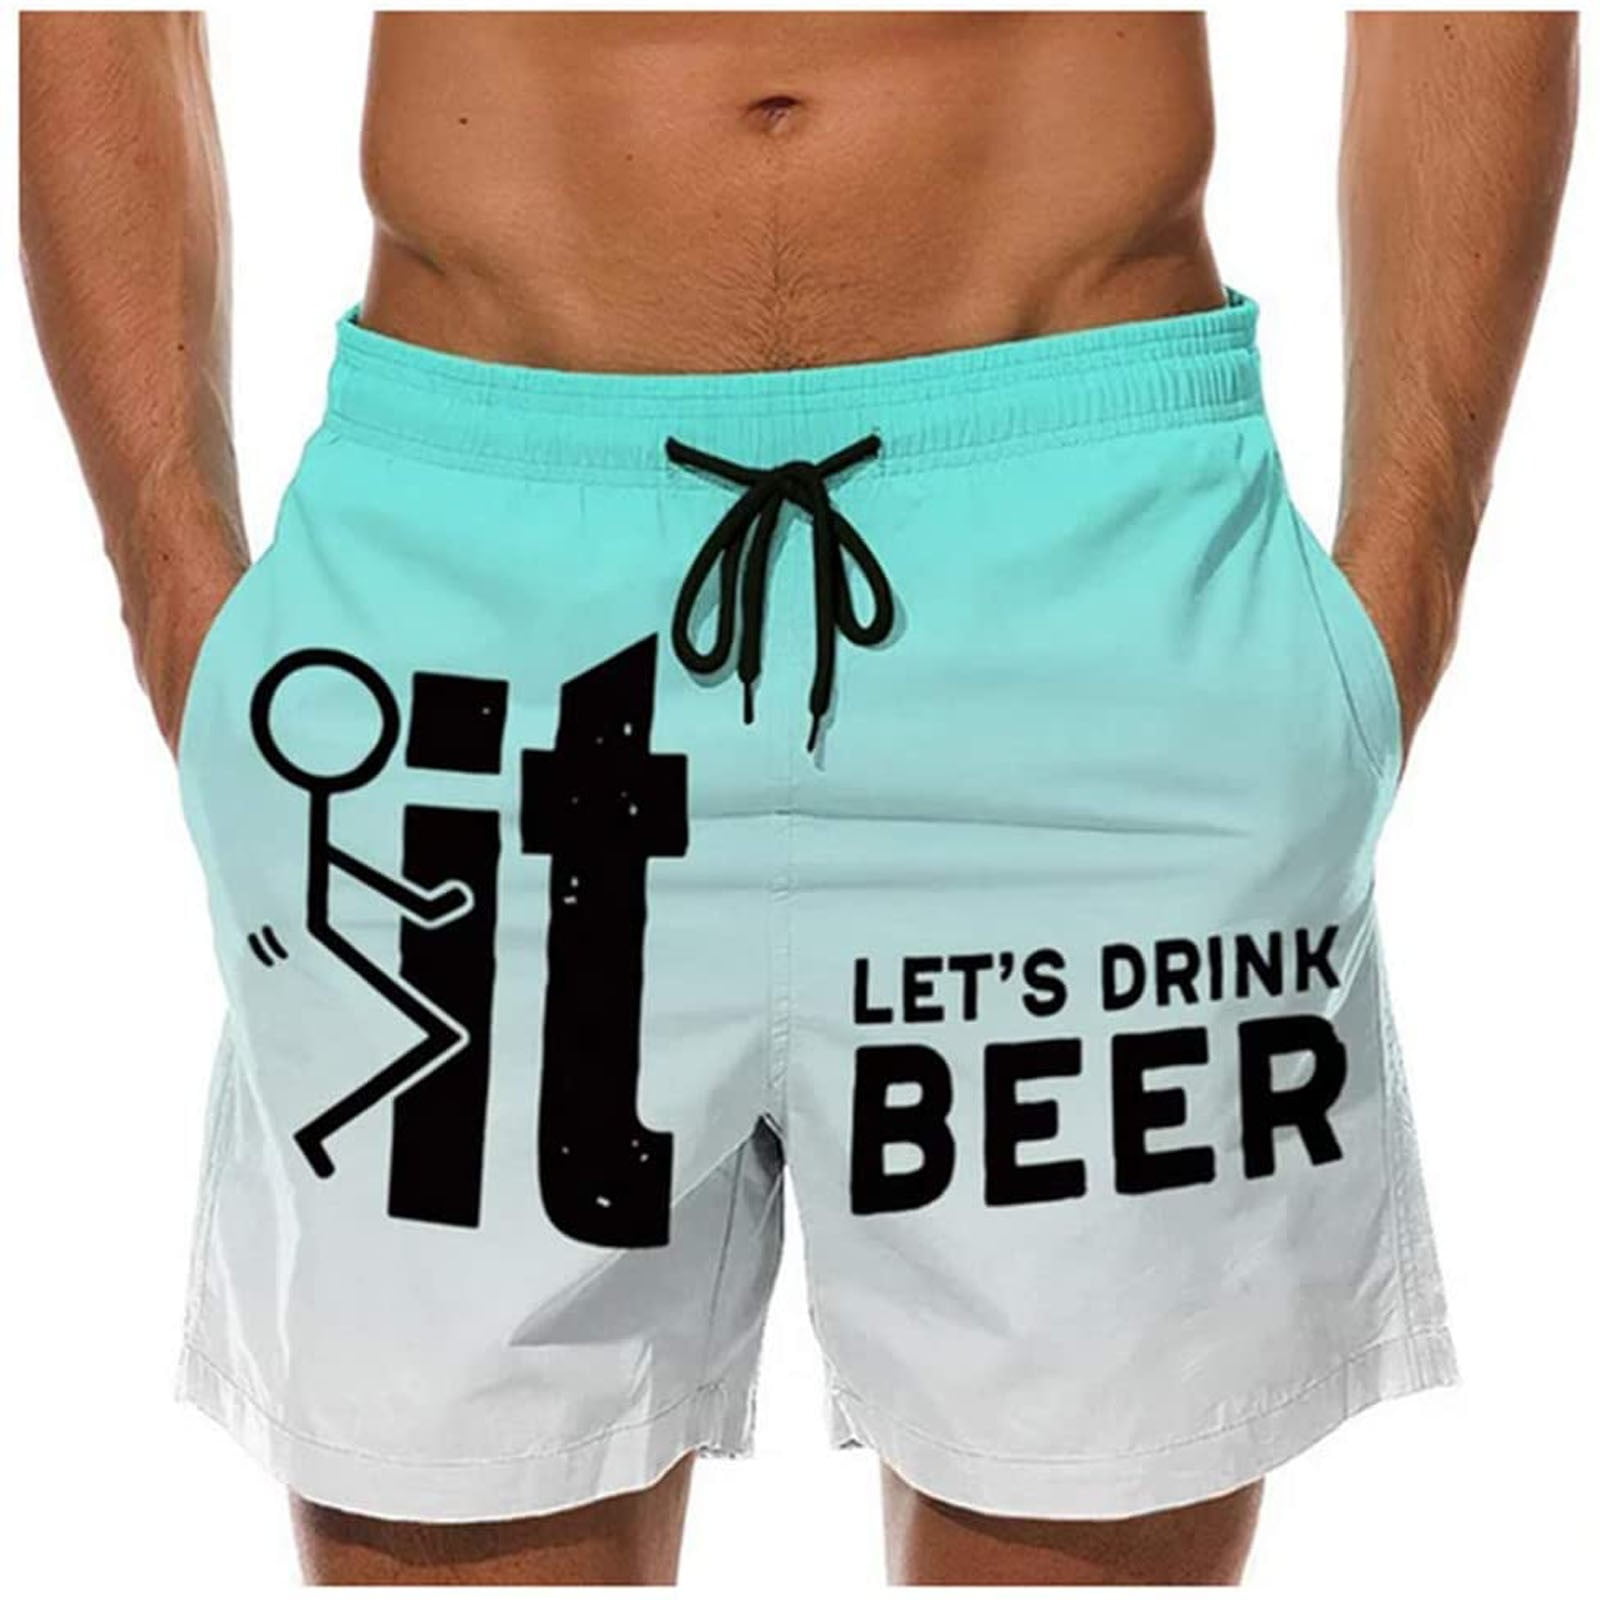 Multi-Element Printing Mens Beach Board Shorts Quick Dry Summer Casual Swimming Soft Fabric with Pocket 